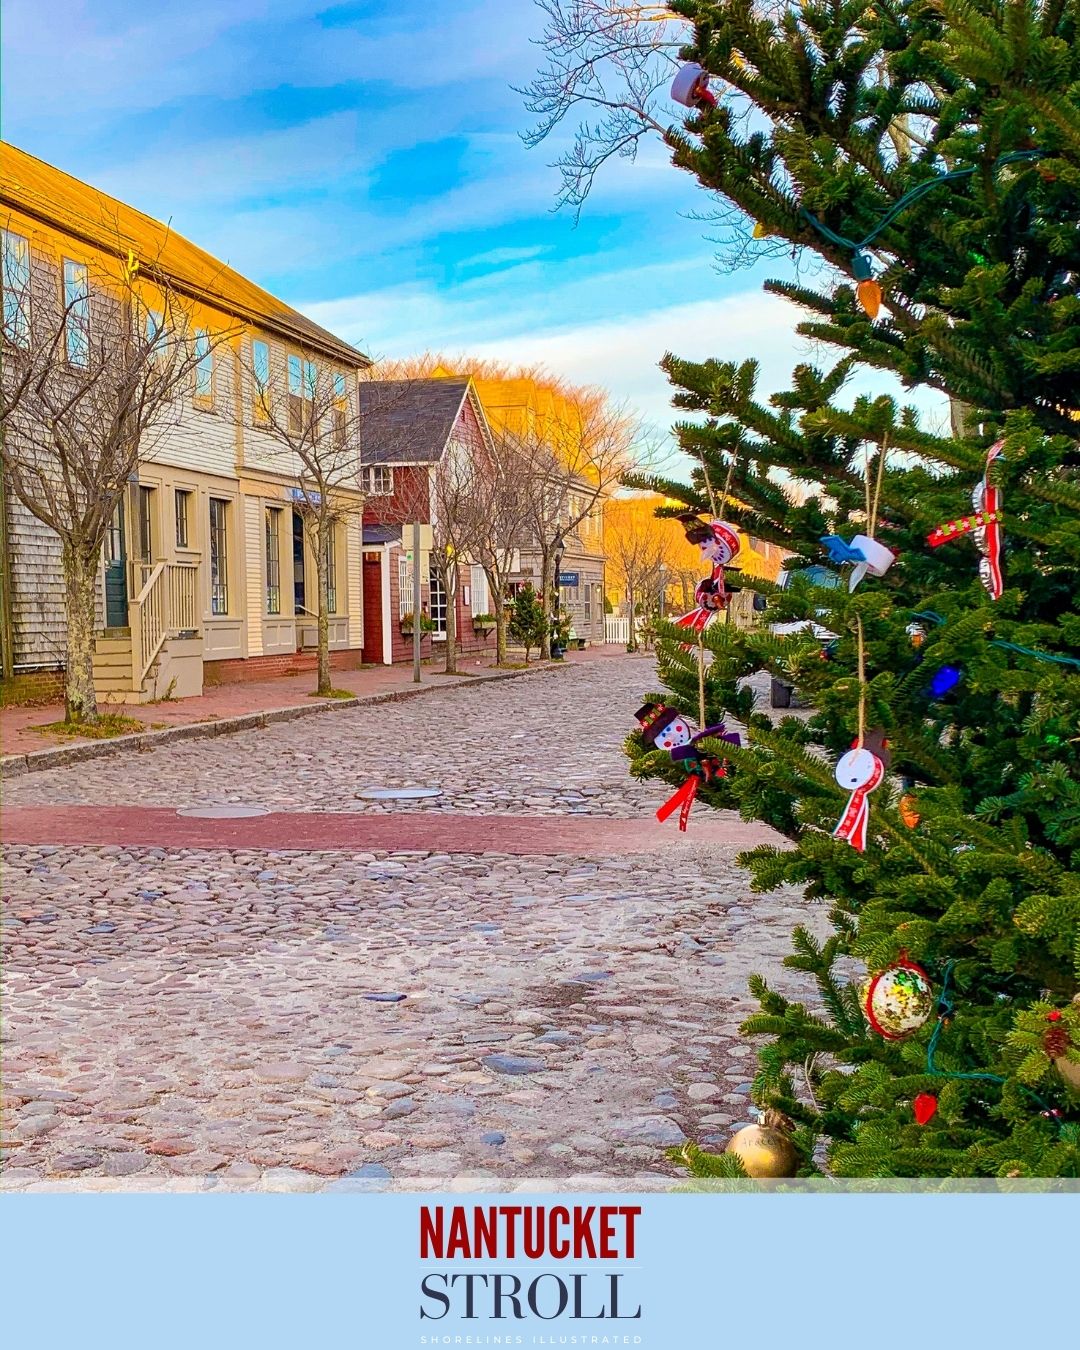 Island Holiday A Guide to Nantucket's Christmas Stroll Shorelines